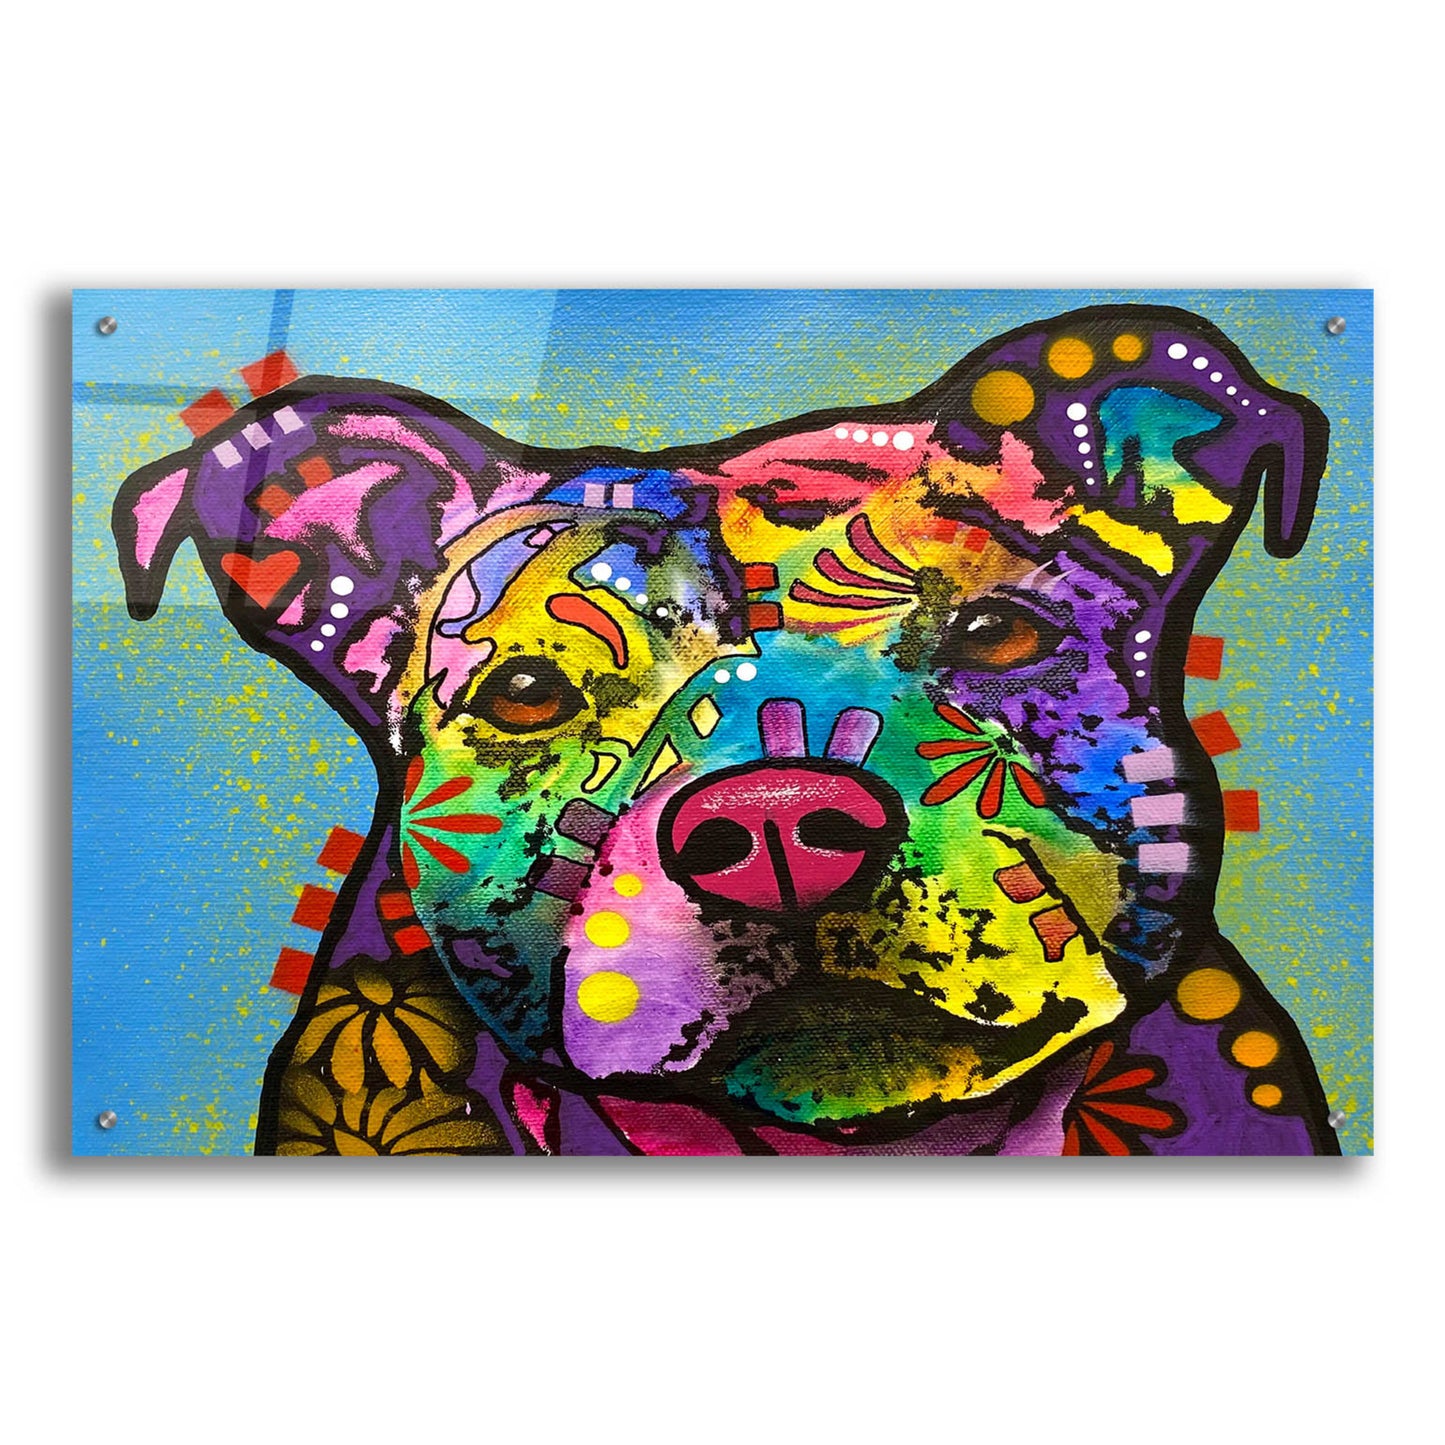 Epic Art 'Let's Get Tacos' by Dean Russo, Acrylic Glass Wall Art,36x24